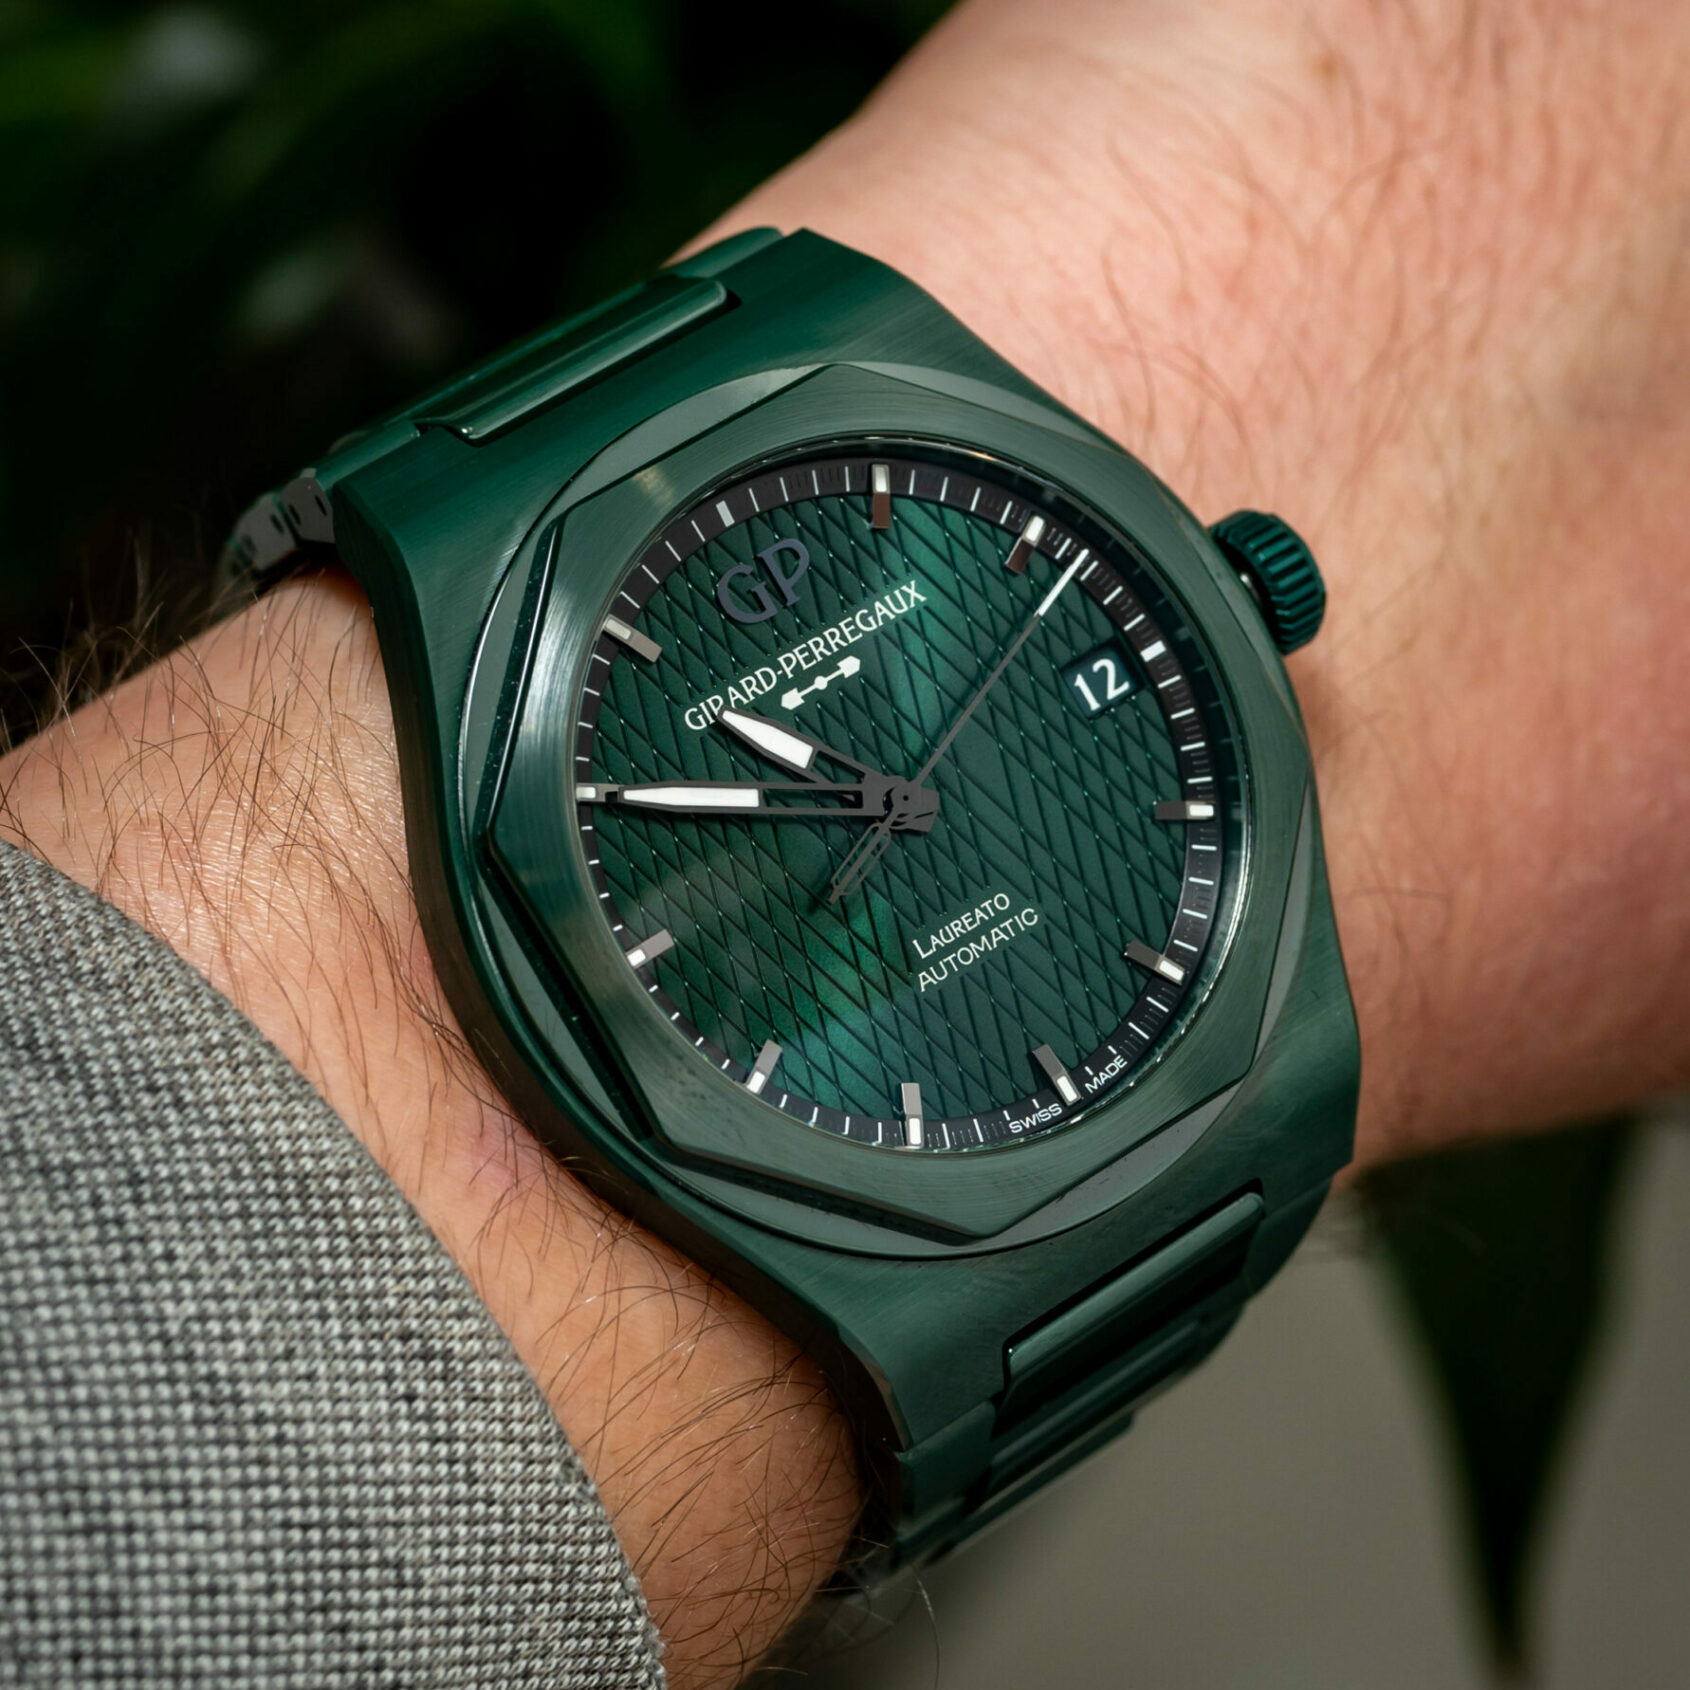 HANDS-ON: The new Girard-Perregaux Laureato Green Ceramic Aston Martin Edition has our hearts racing